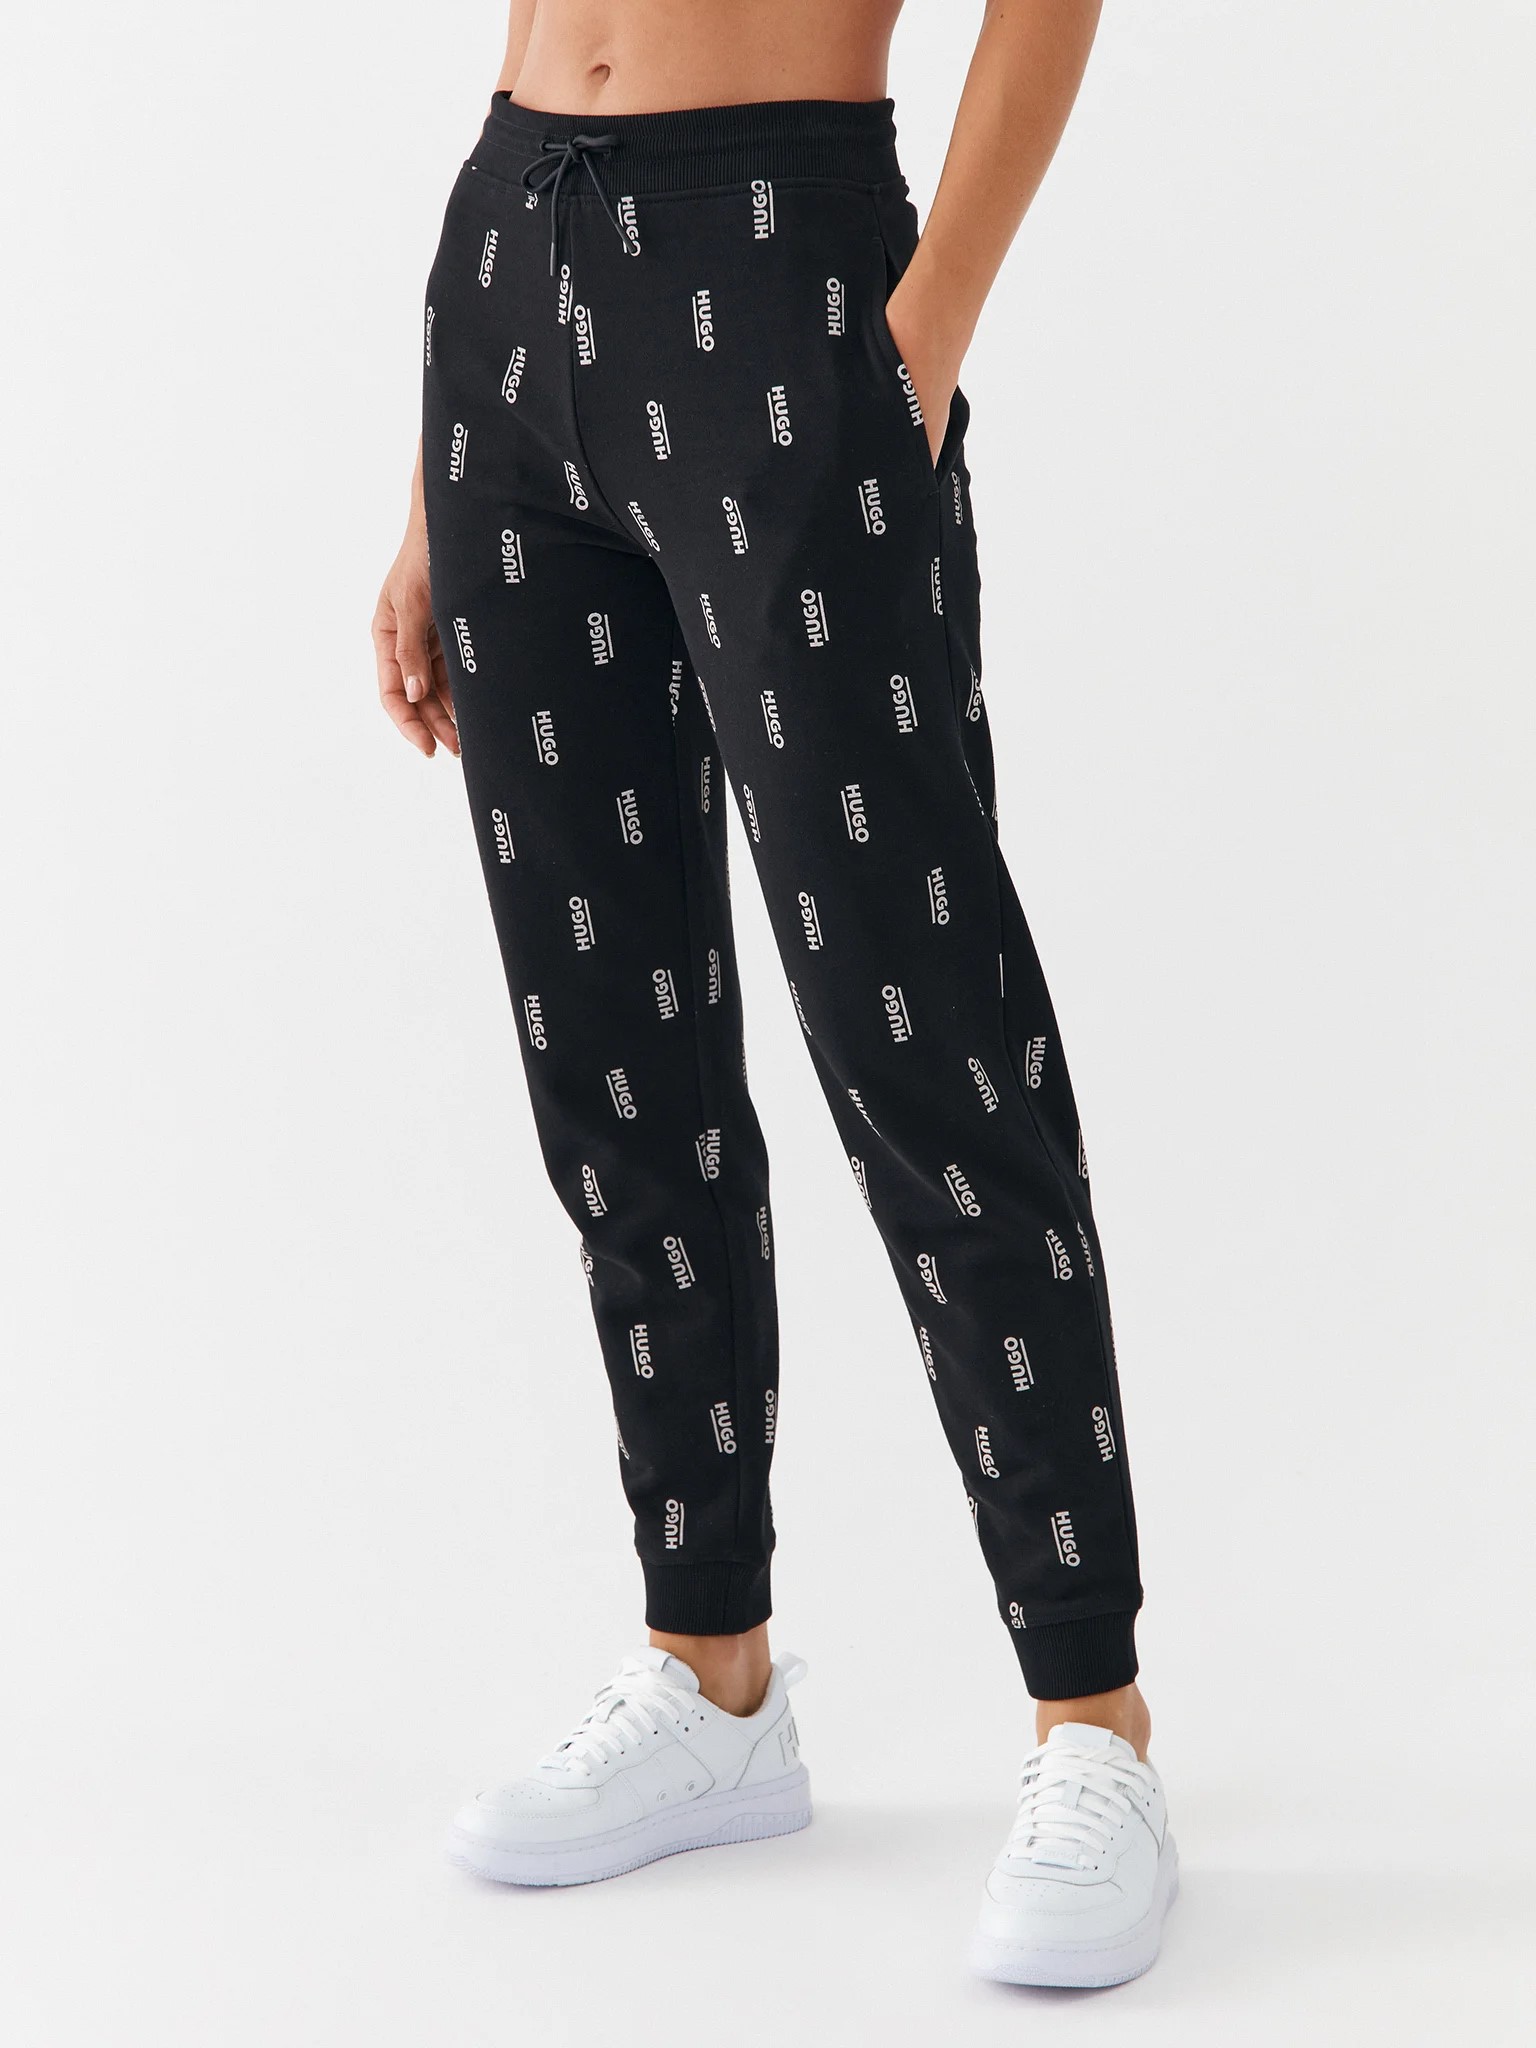 JXELOISE RLX MW LONG PANTS SWT | ANTHRACITE